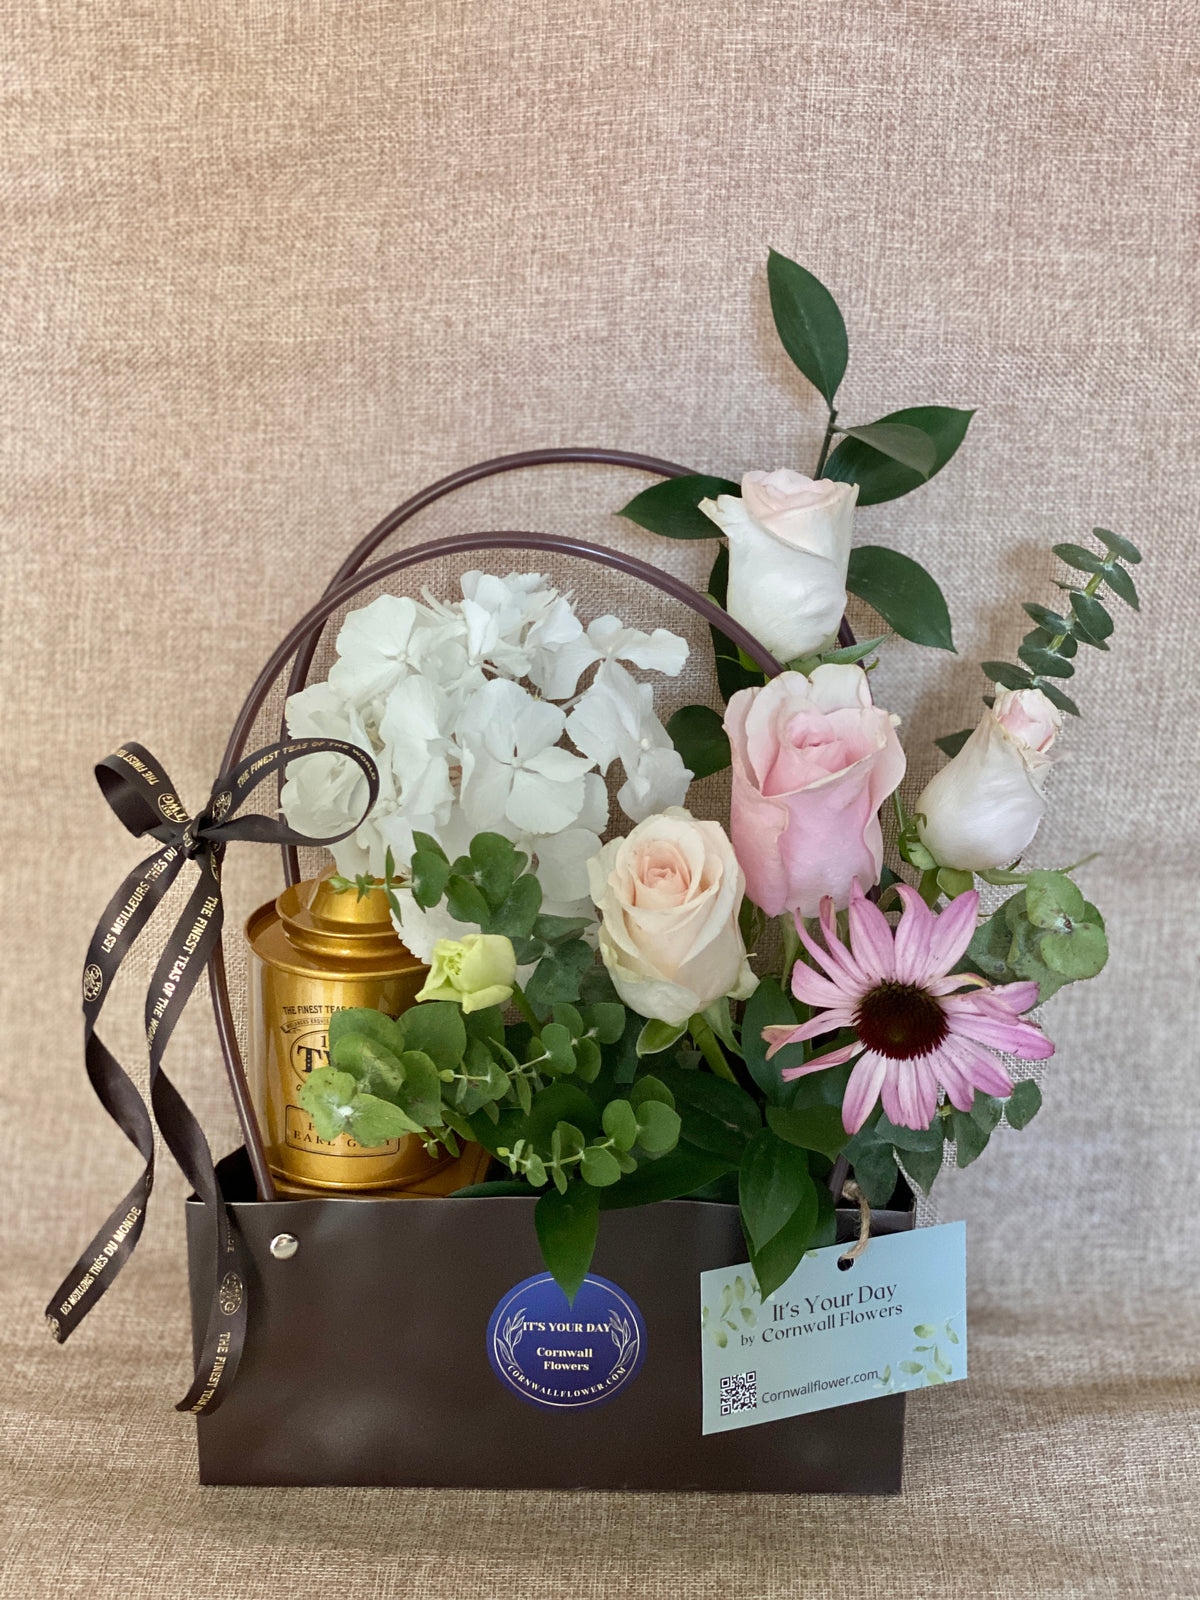 Tea and Flowers Gift Basket